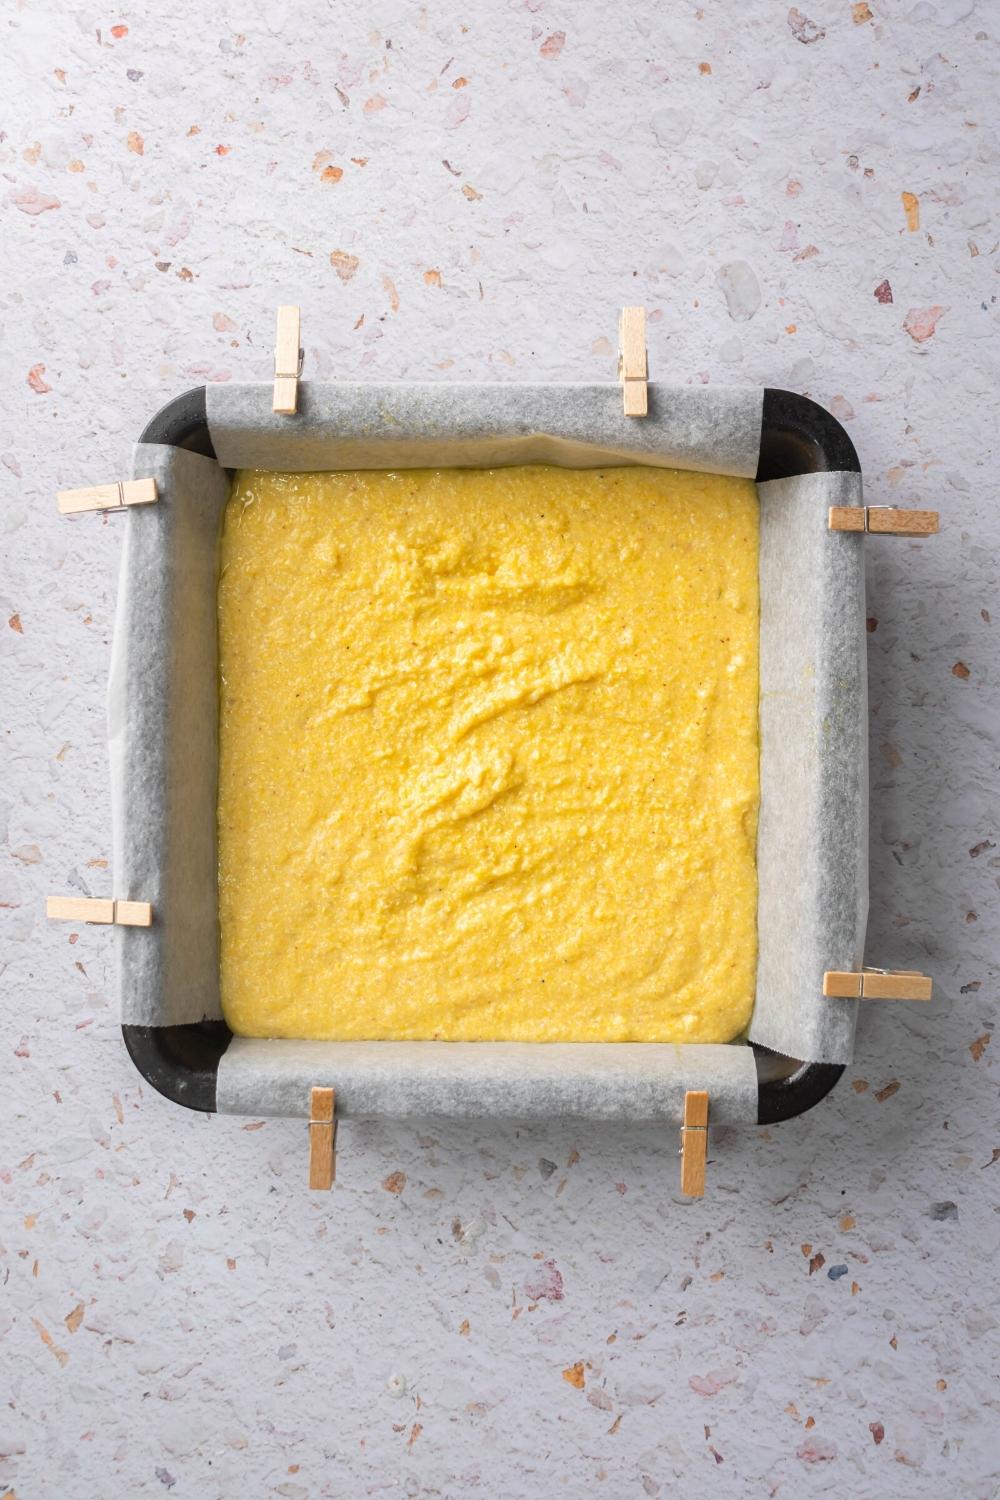 Creamy polenta in a baking tray line with parchment paper.